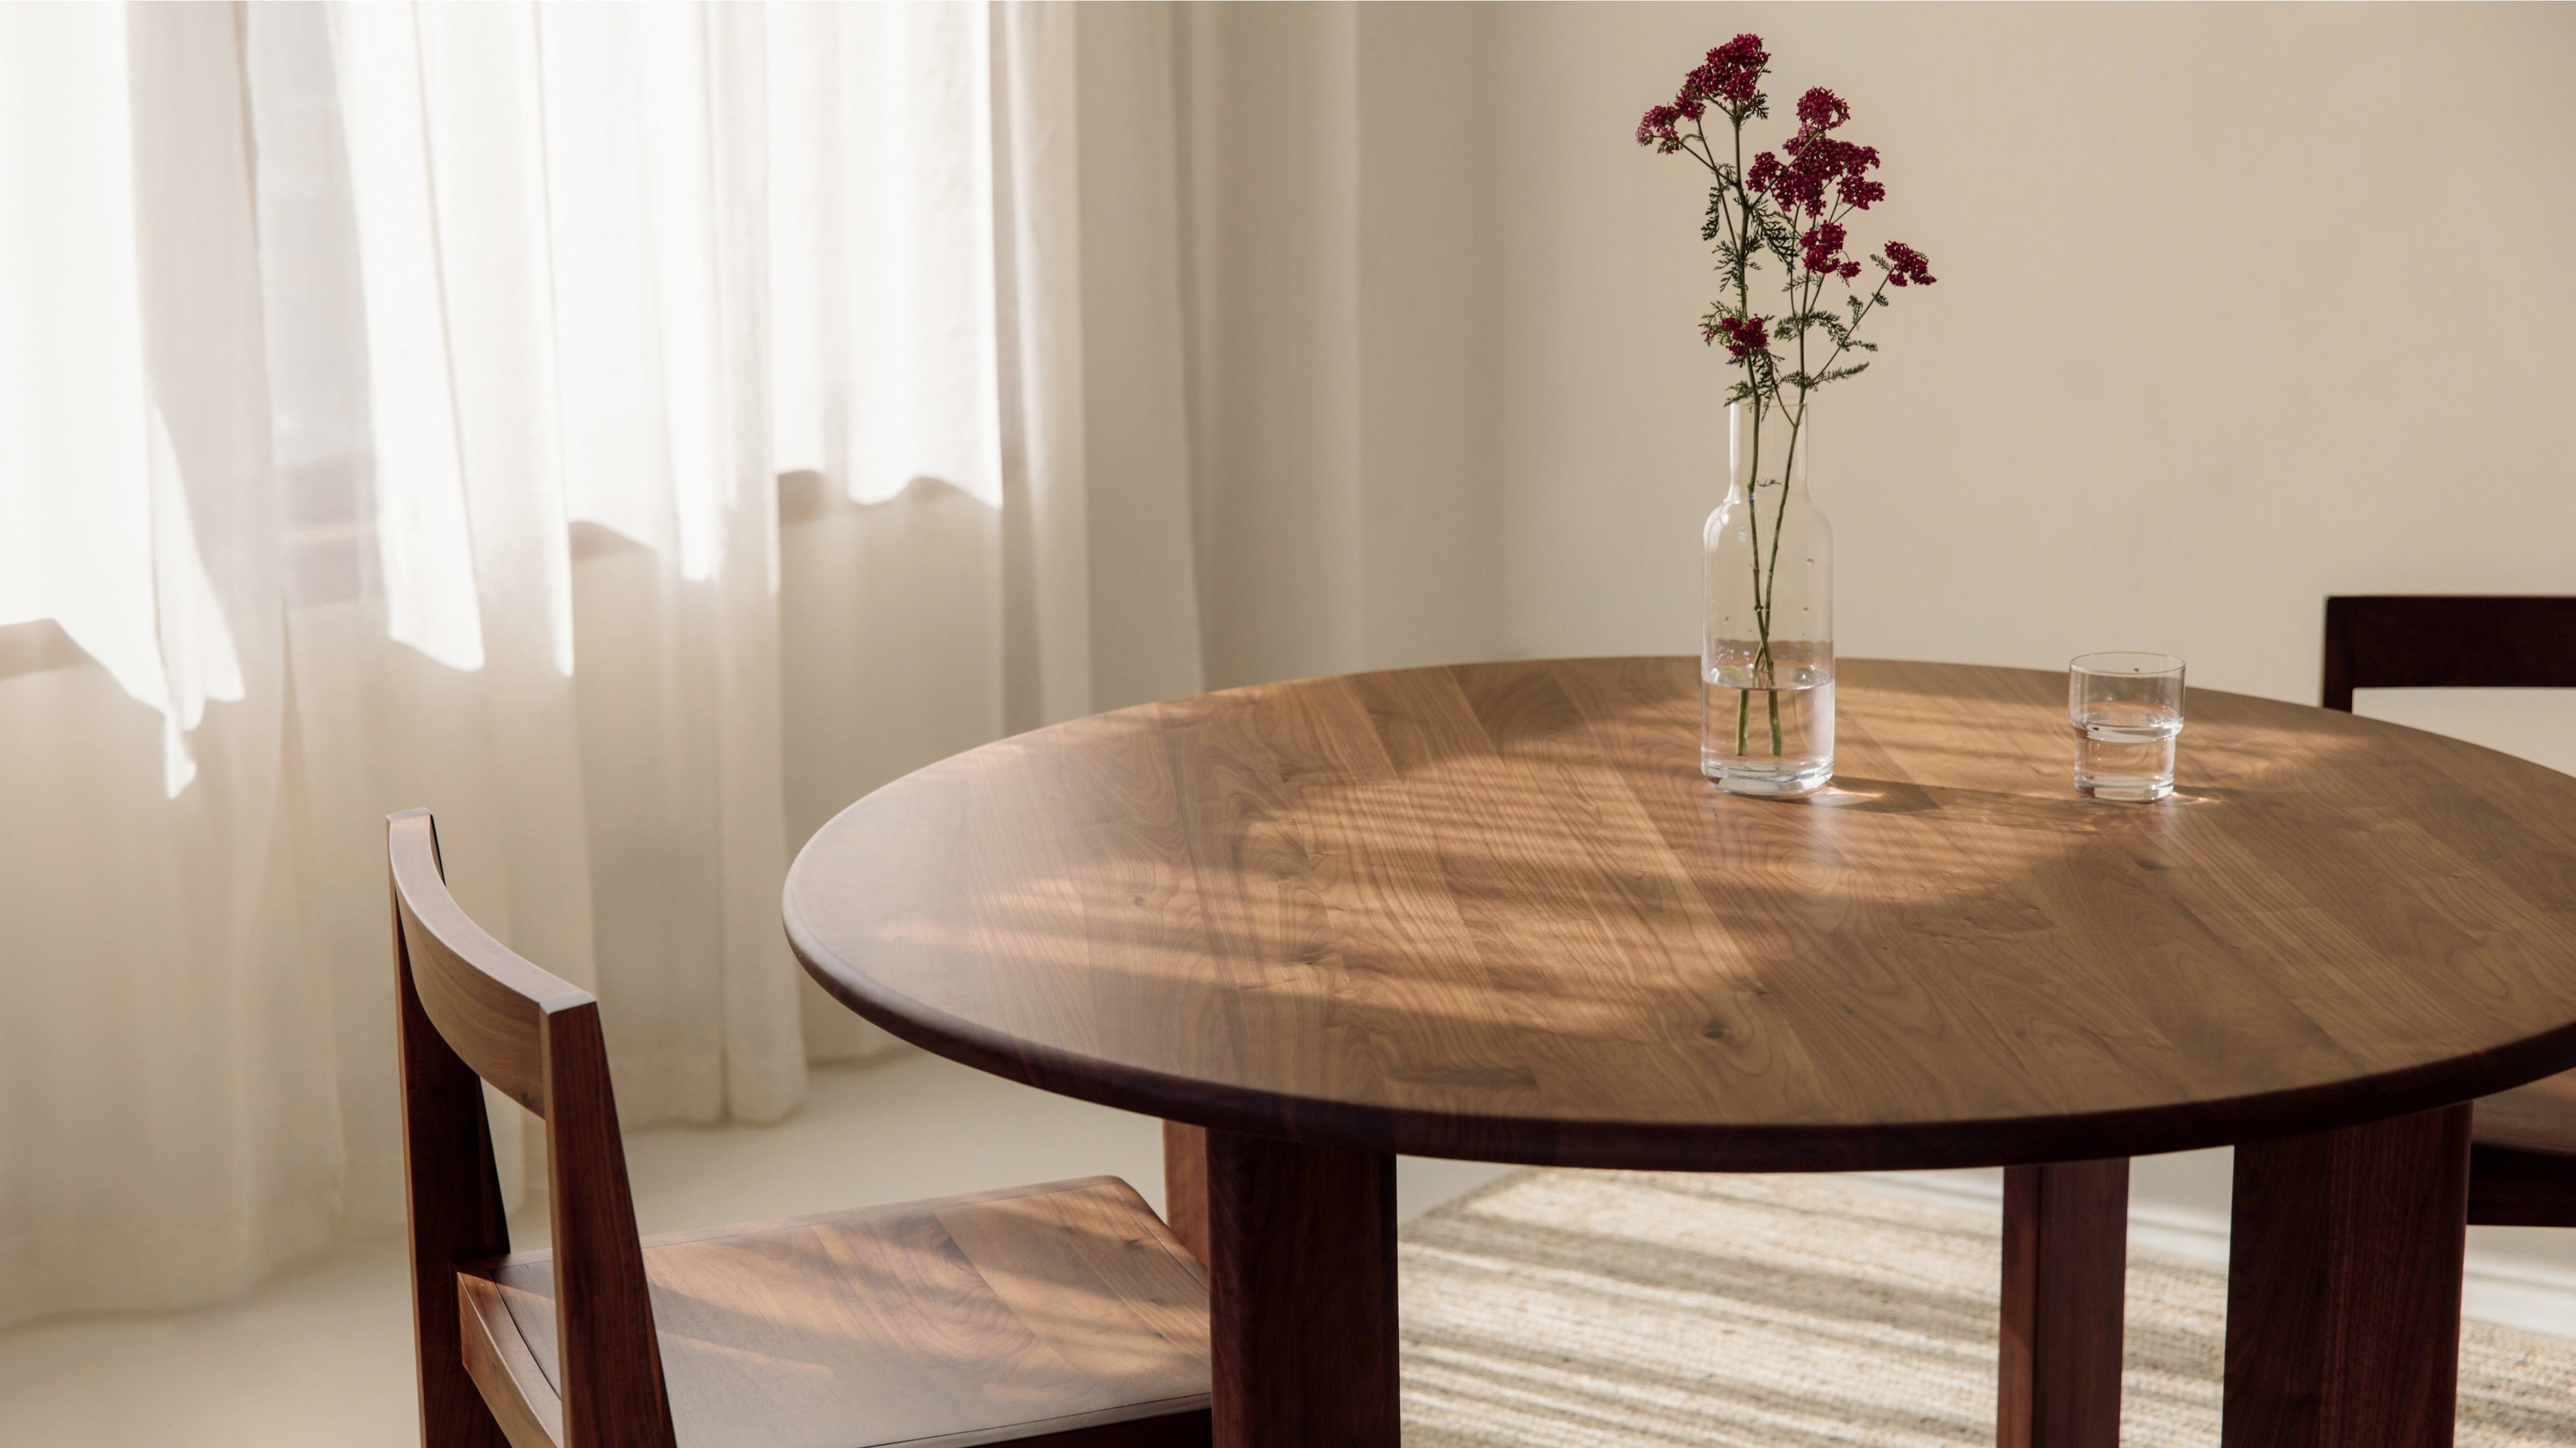 Frame Round Dining Table, Seats 4-5 People, Walnut - Image 6